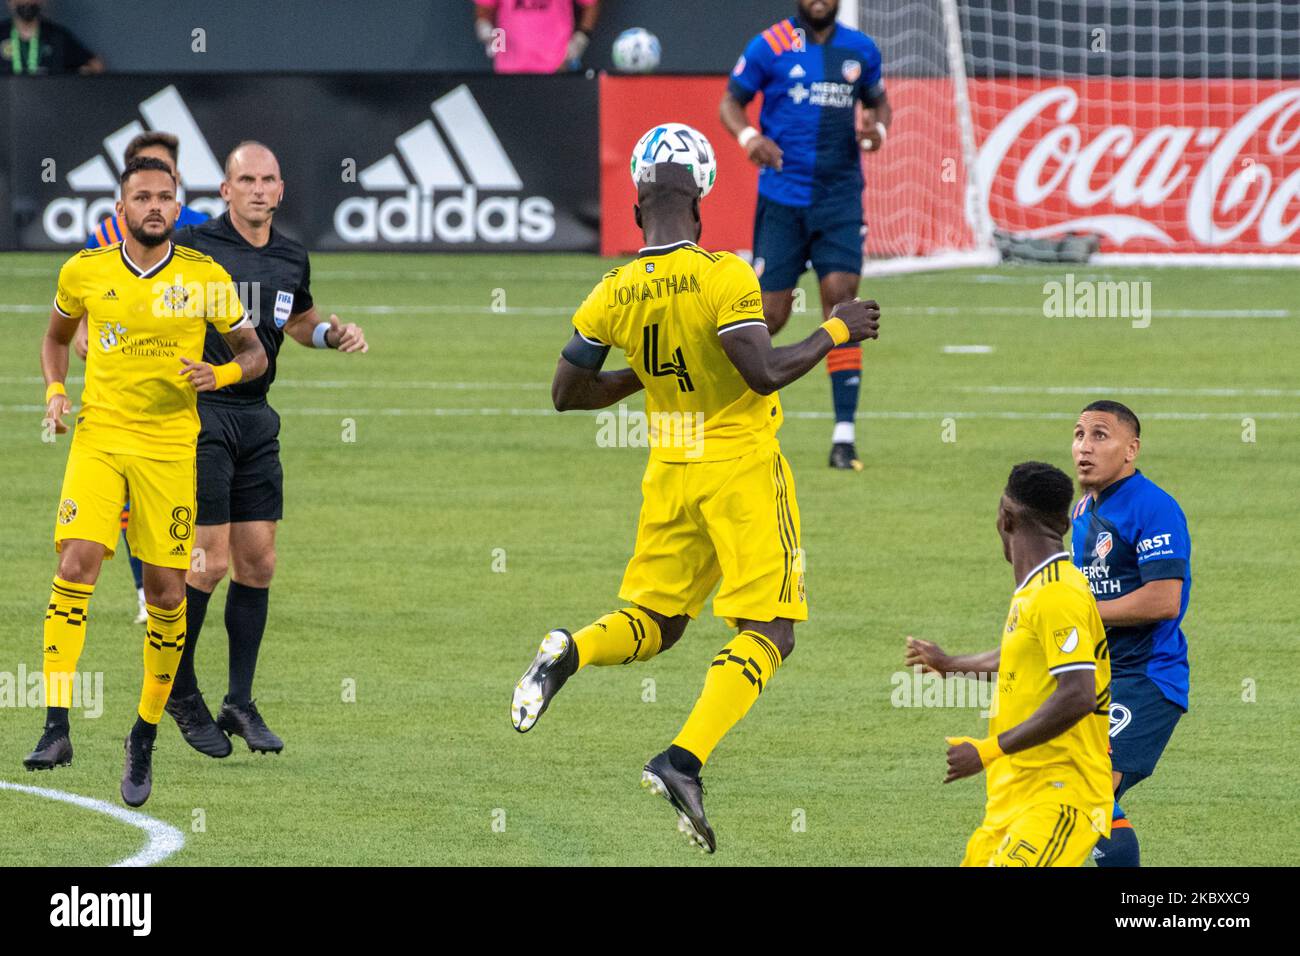 Columbus Crew defender Jonathan Mensah heads a ball during a MLS soccer match between FC Cincinnati and Columbus Crew that ended in a 0-0 draw at Nippert Stadium, Saturday, August 29th, 2020, in Cincinnati, OH. (Photo by Jason Whitman/NurPhoto) Stock Photo